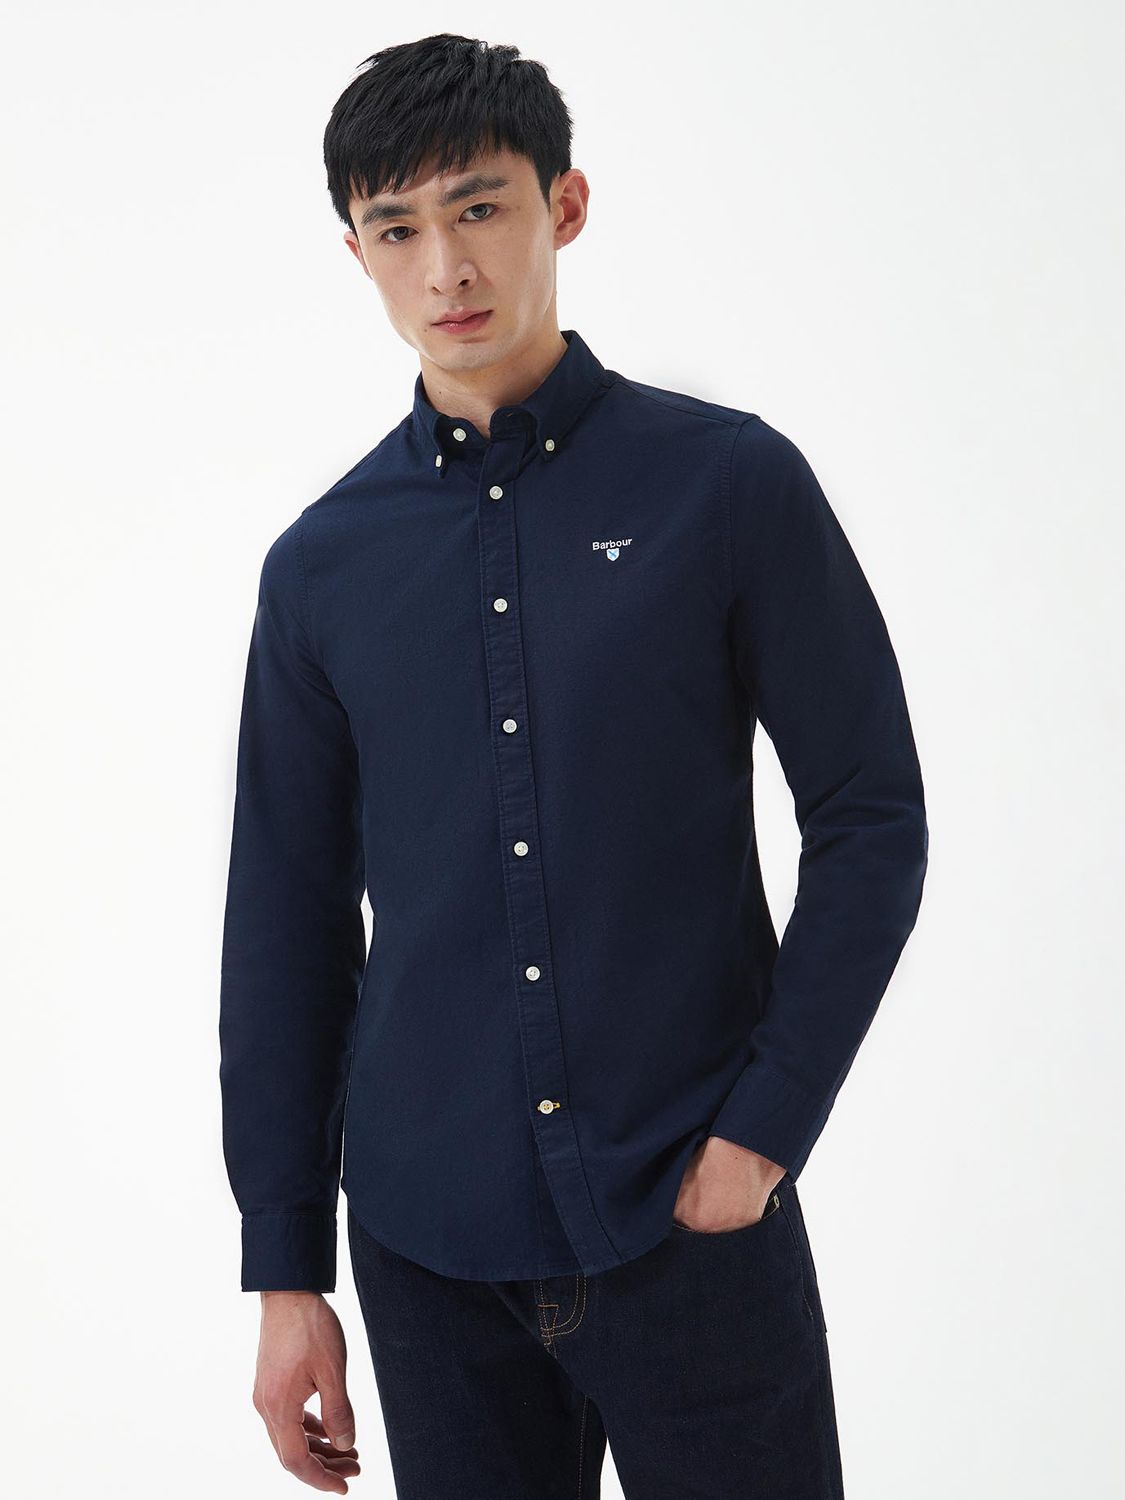 Barbour Tailored Fit Oxford Shirt, Navy, M